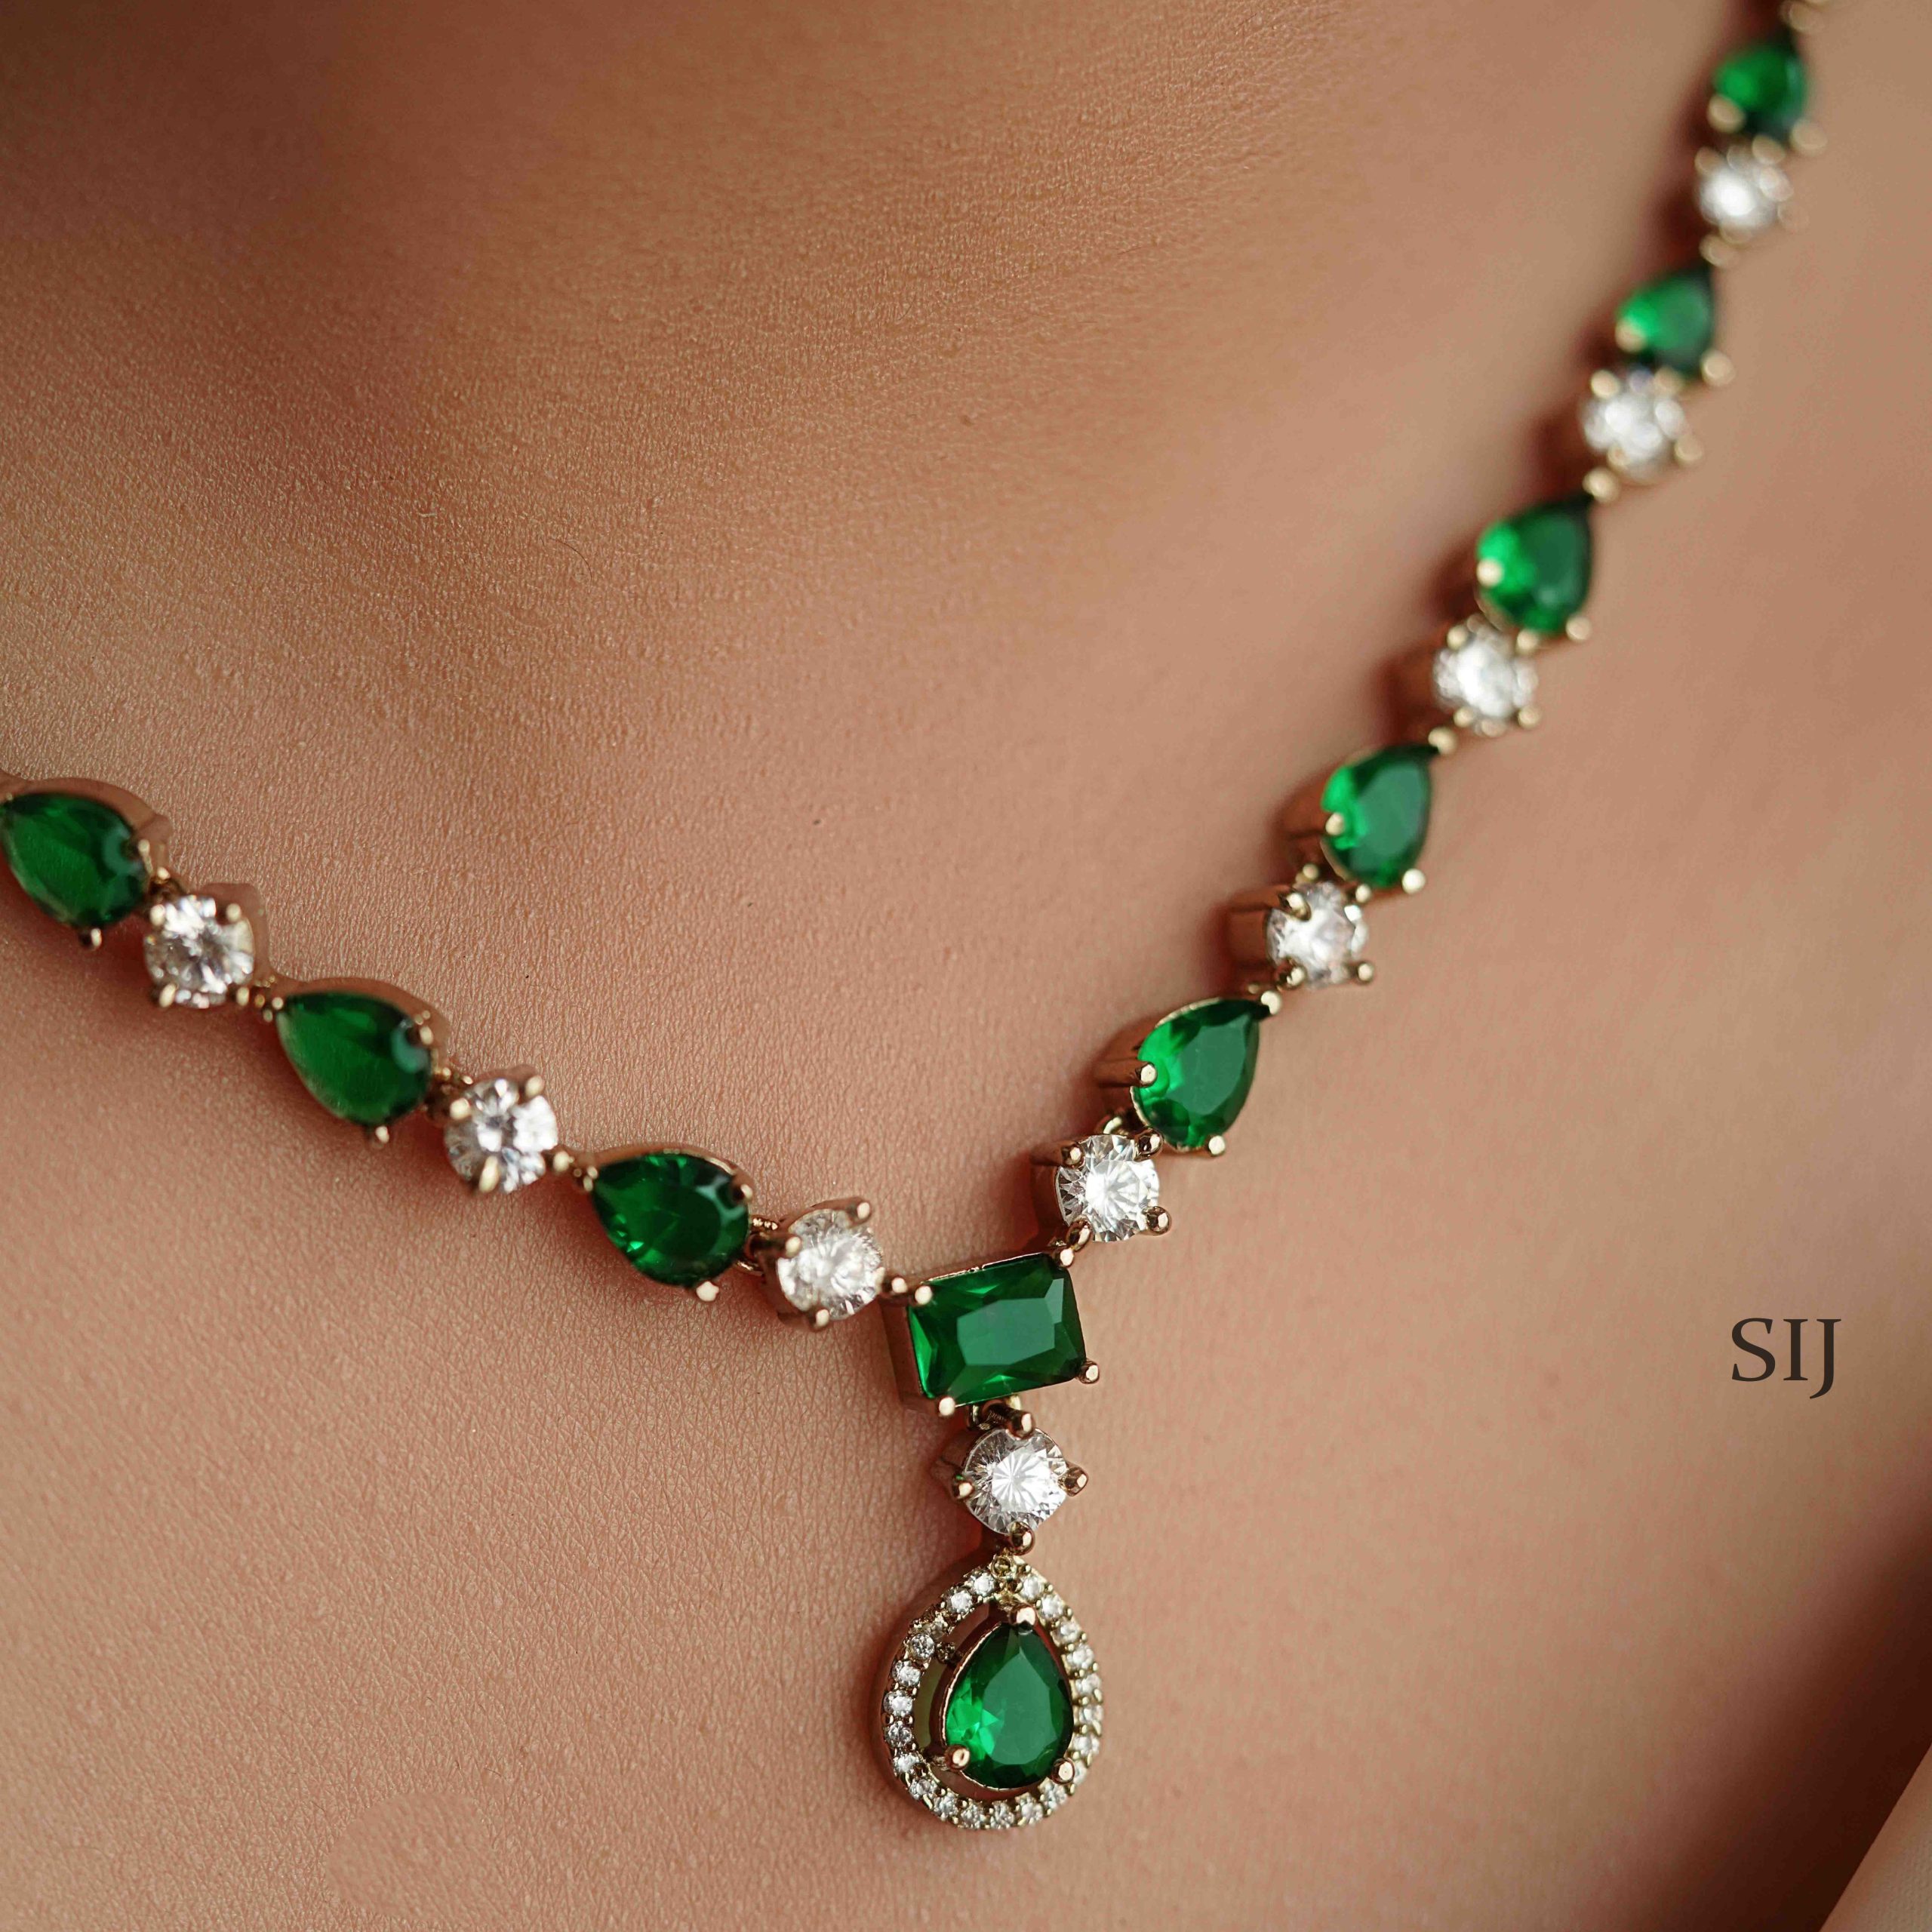 Artificial White And Green Stones Necklace Set